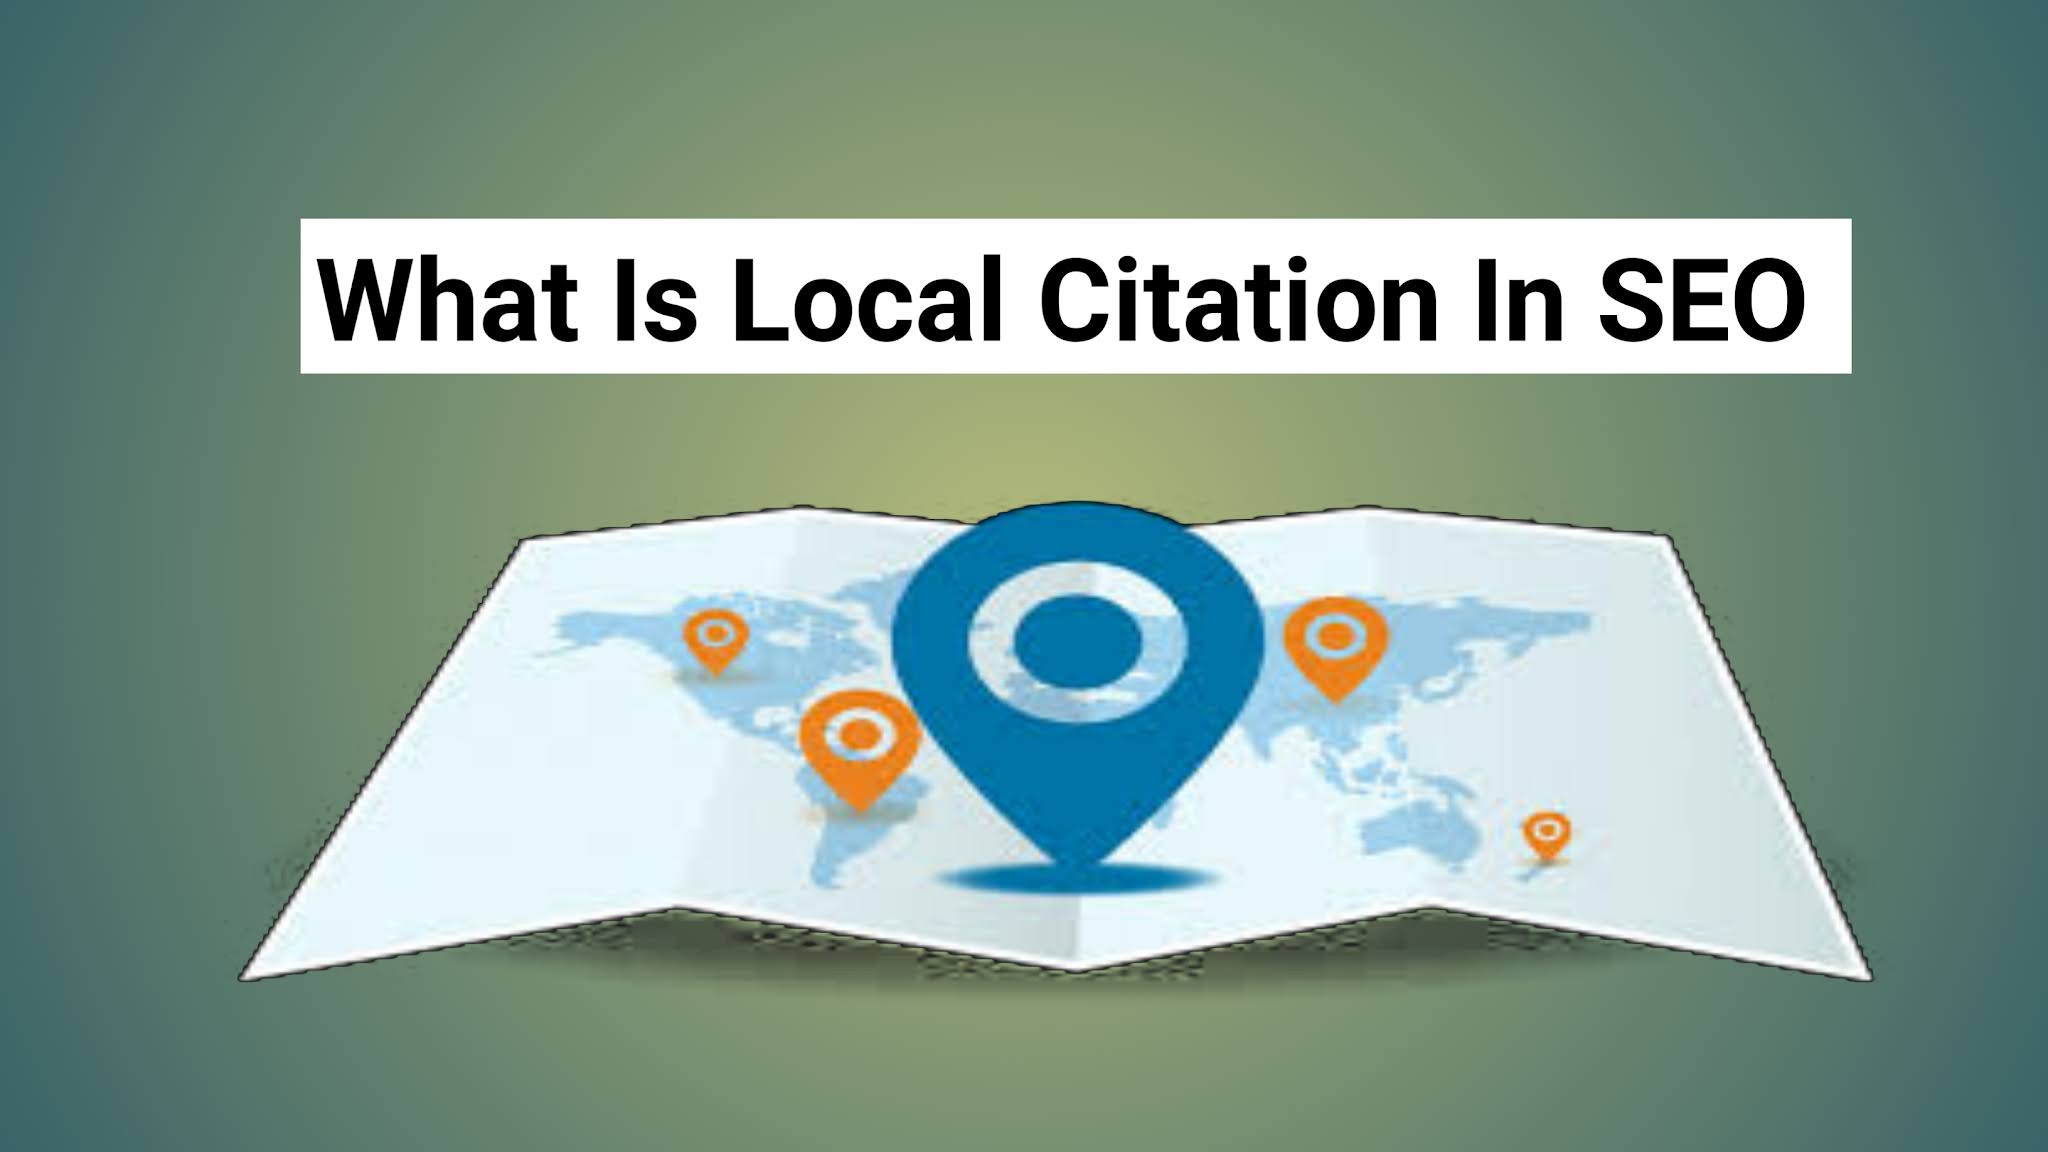 What Is Local Citation In SEO